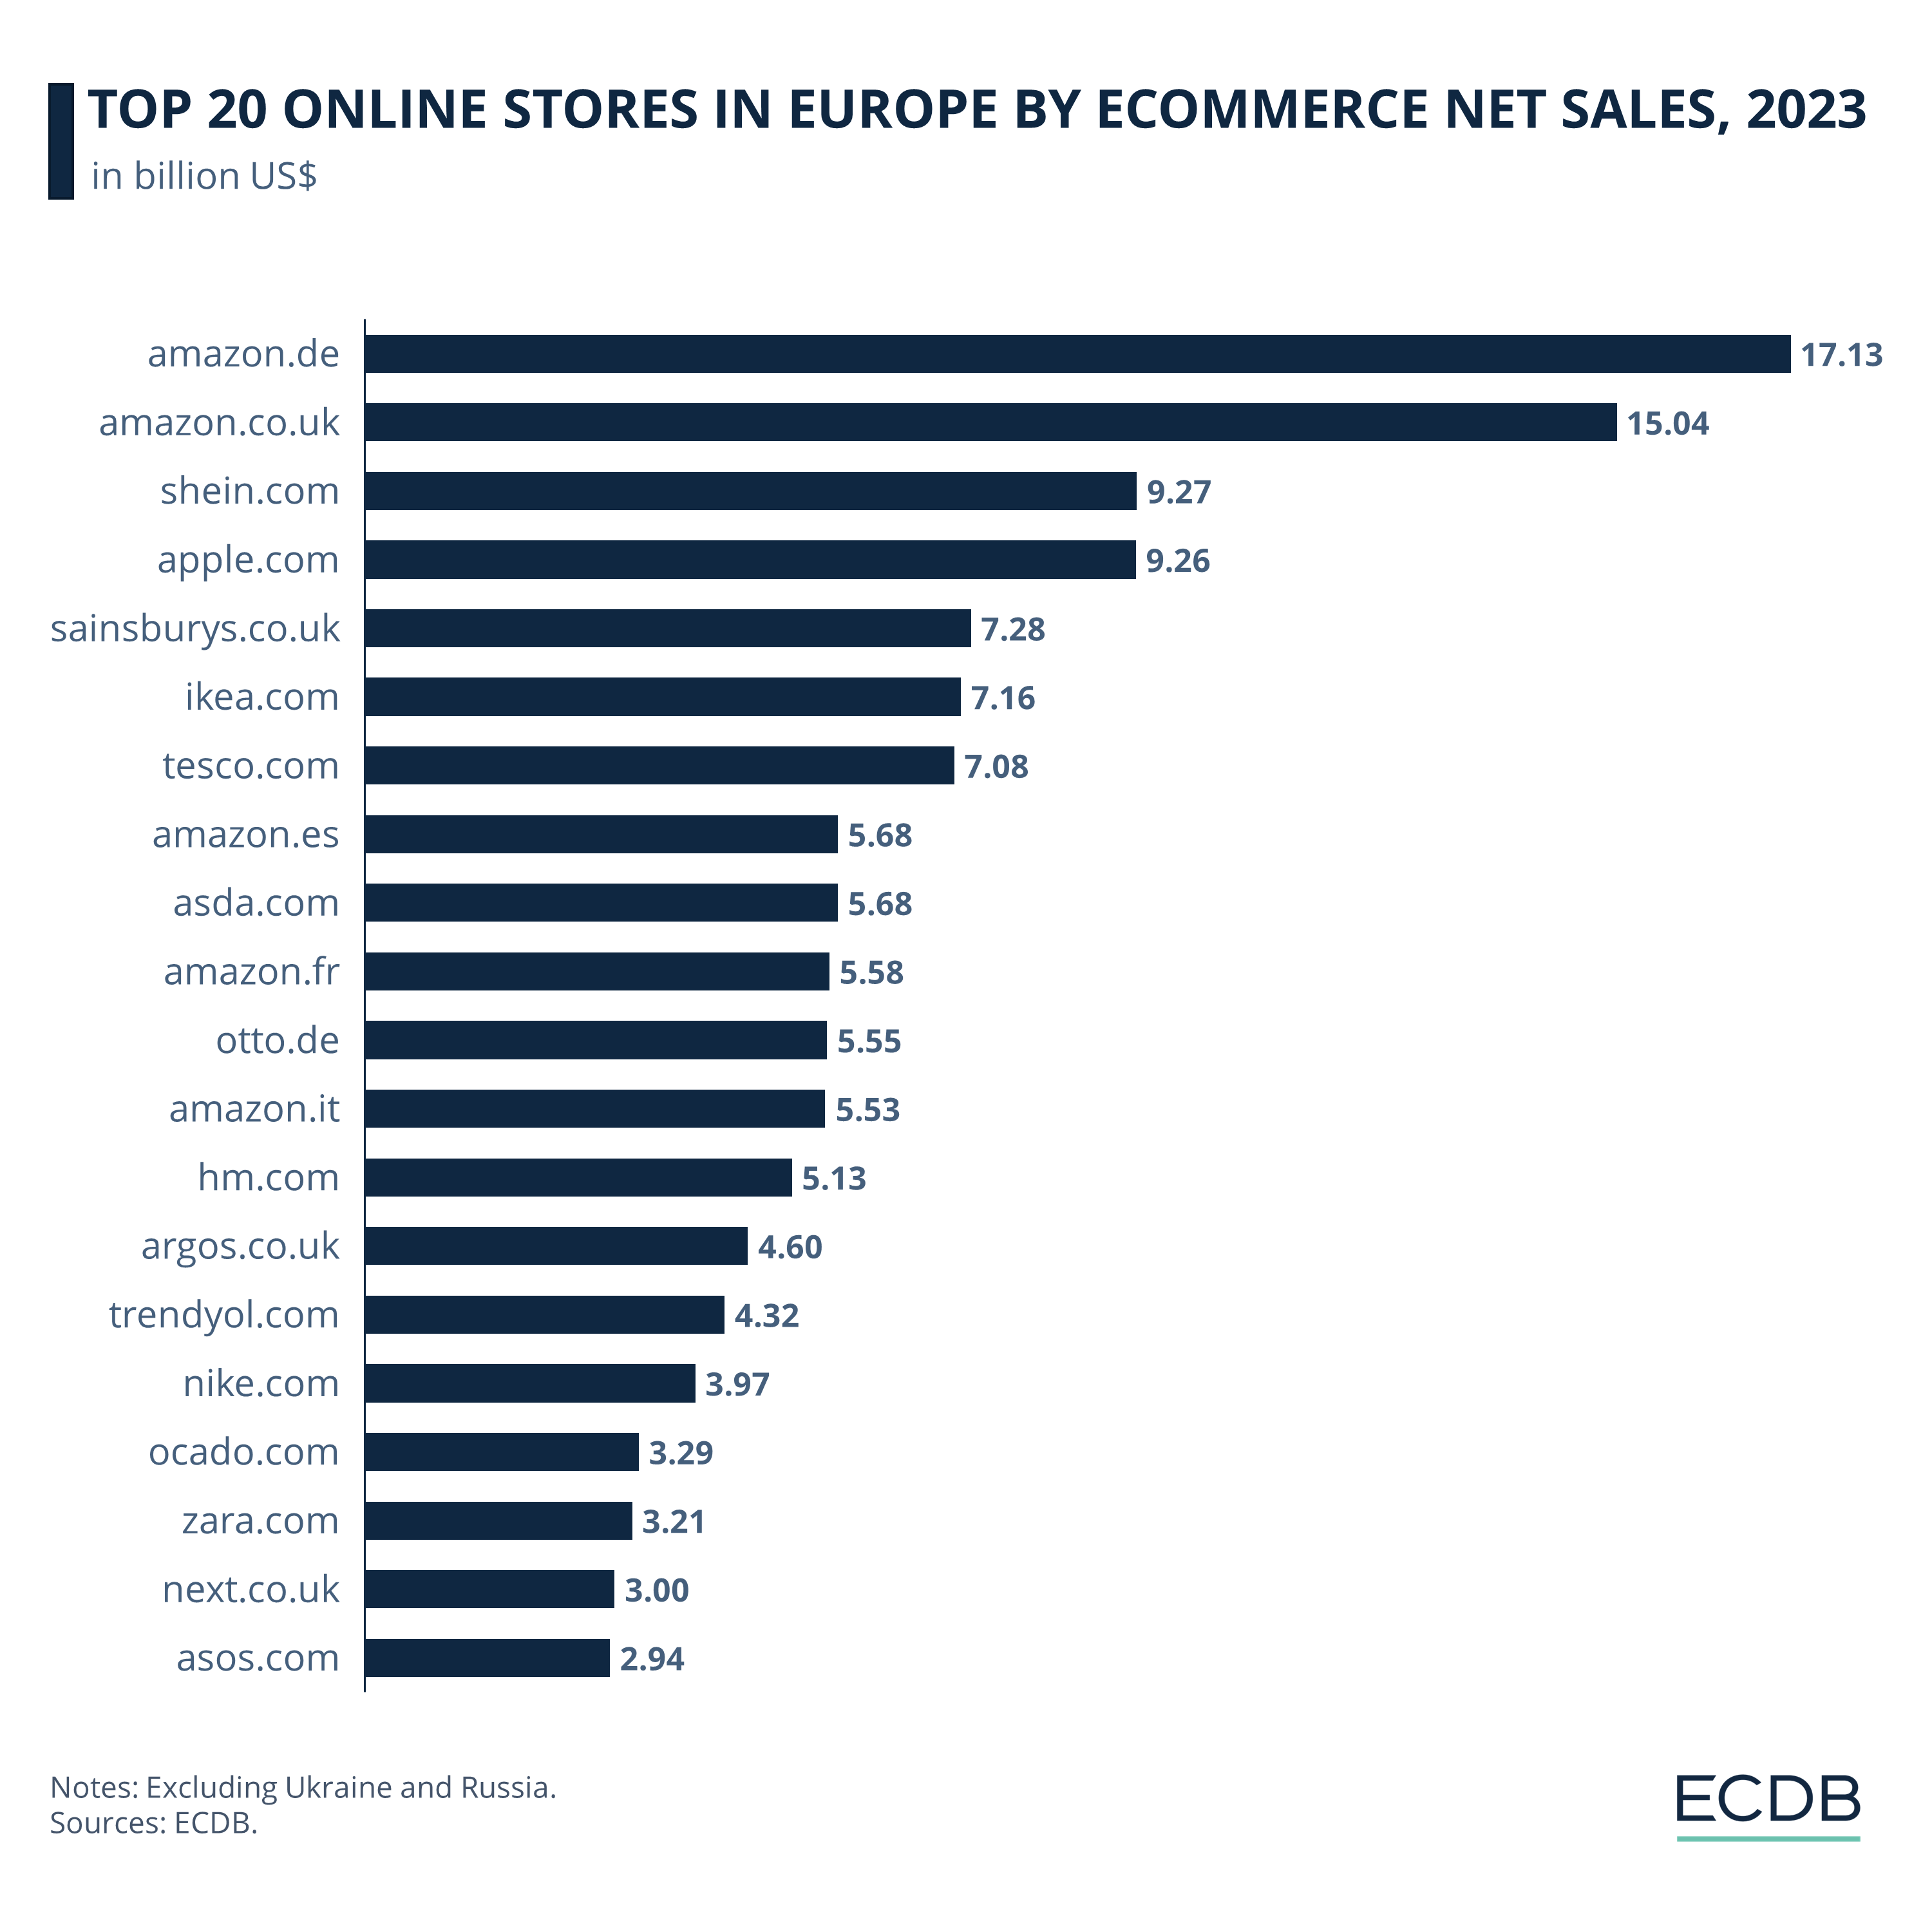 Top Online Stores in Europe 2023: Key Players, Net Sales & Market Share